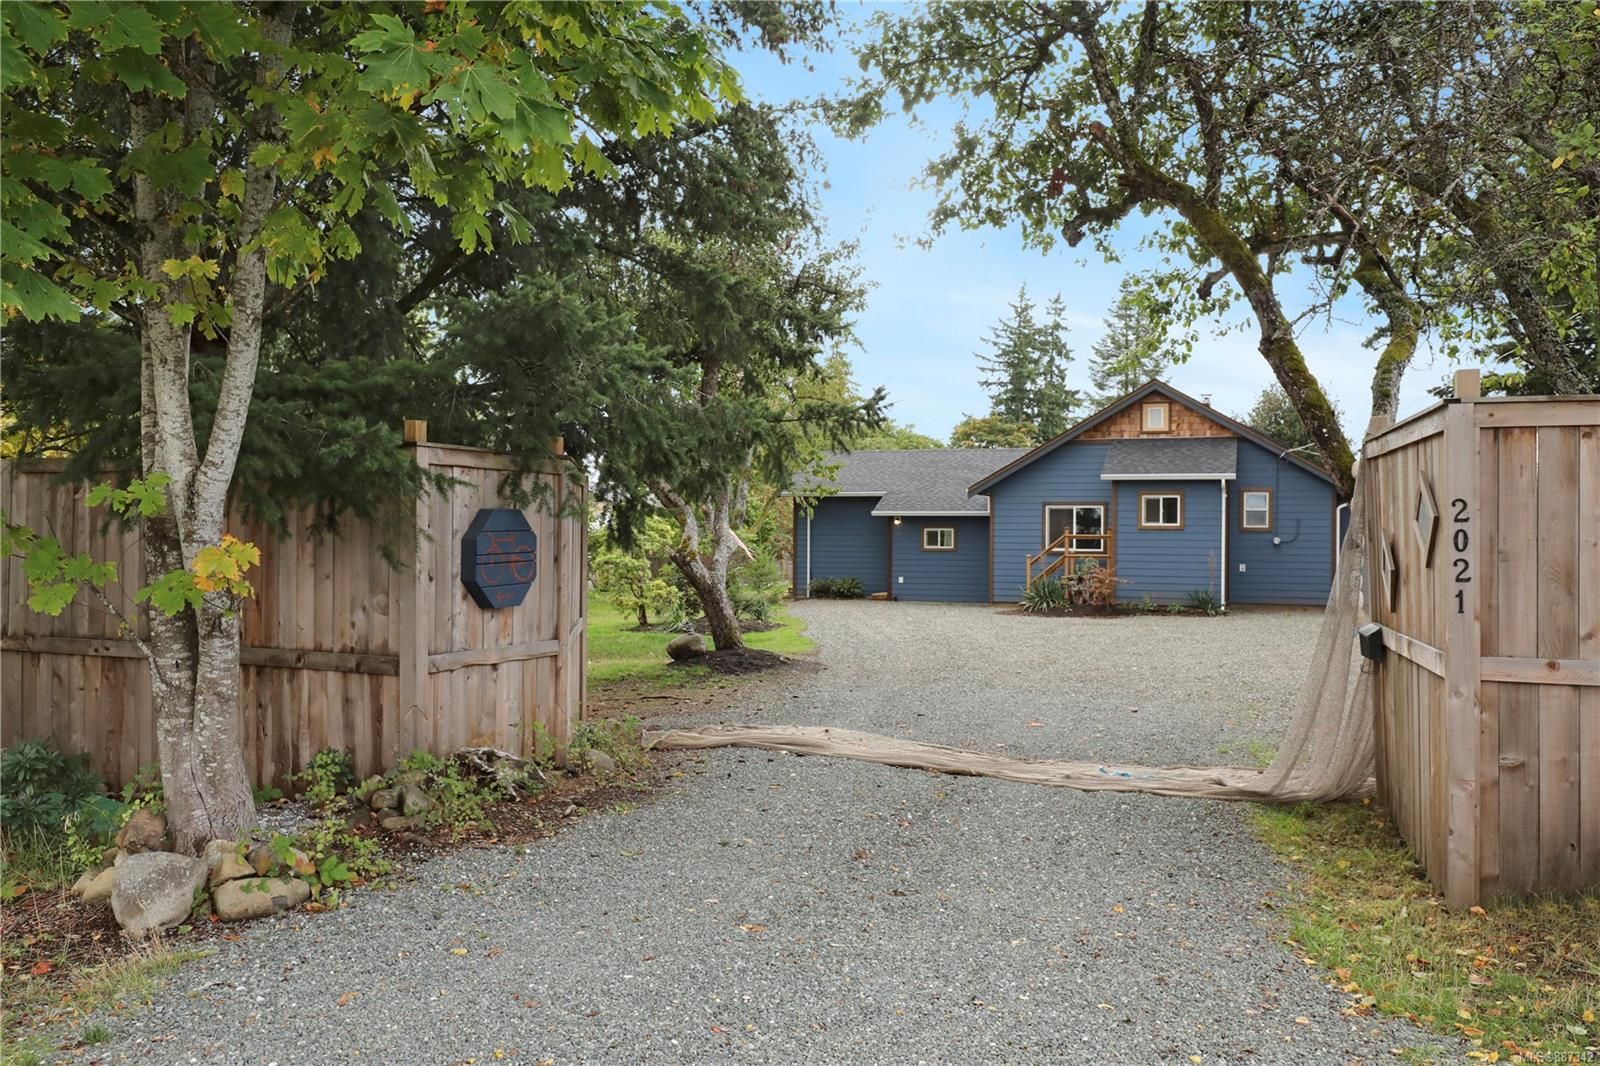 I have sold a property at 2021 Noel Ave in Comox
